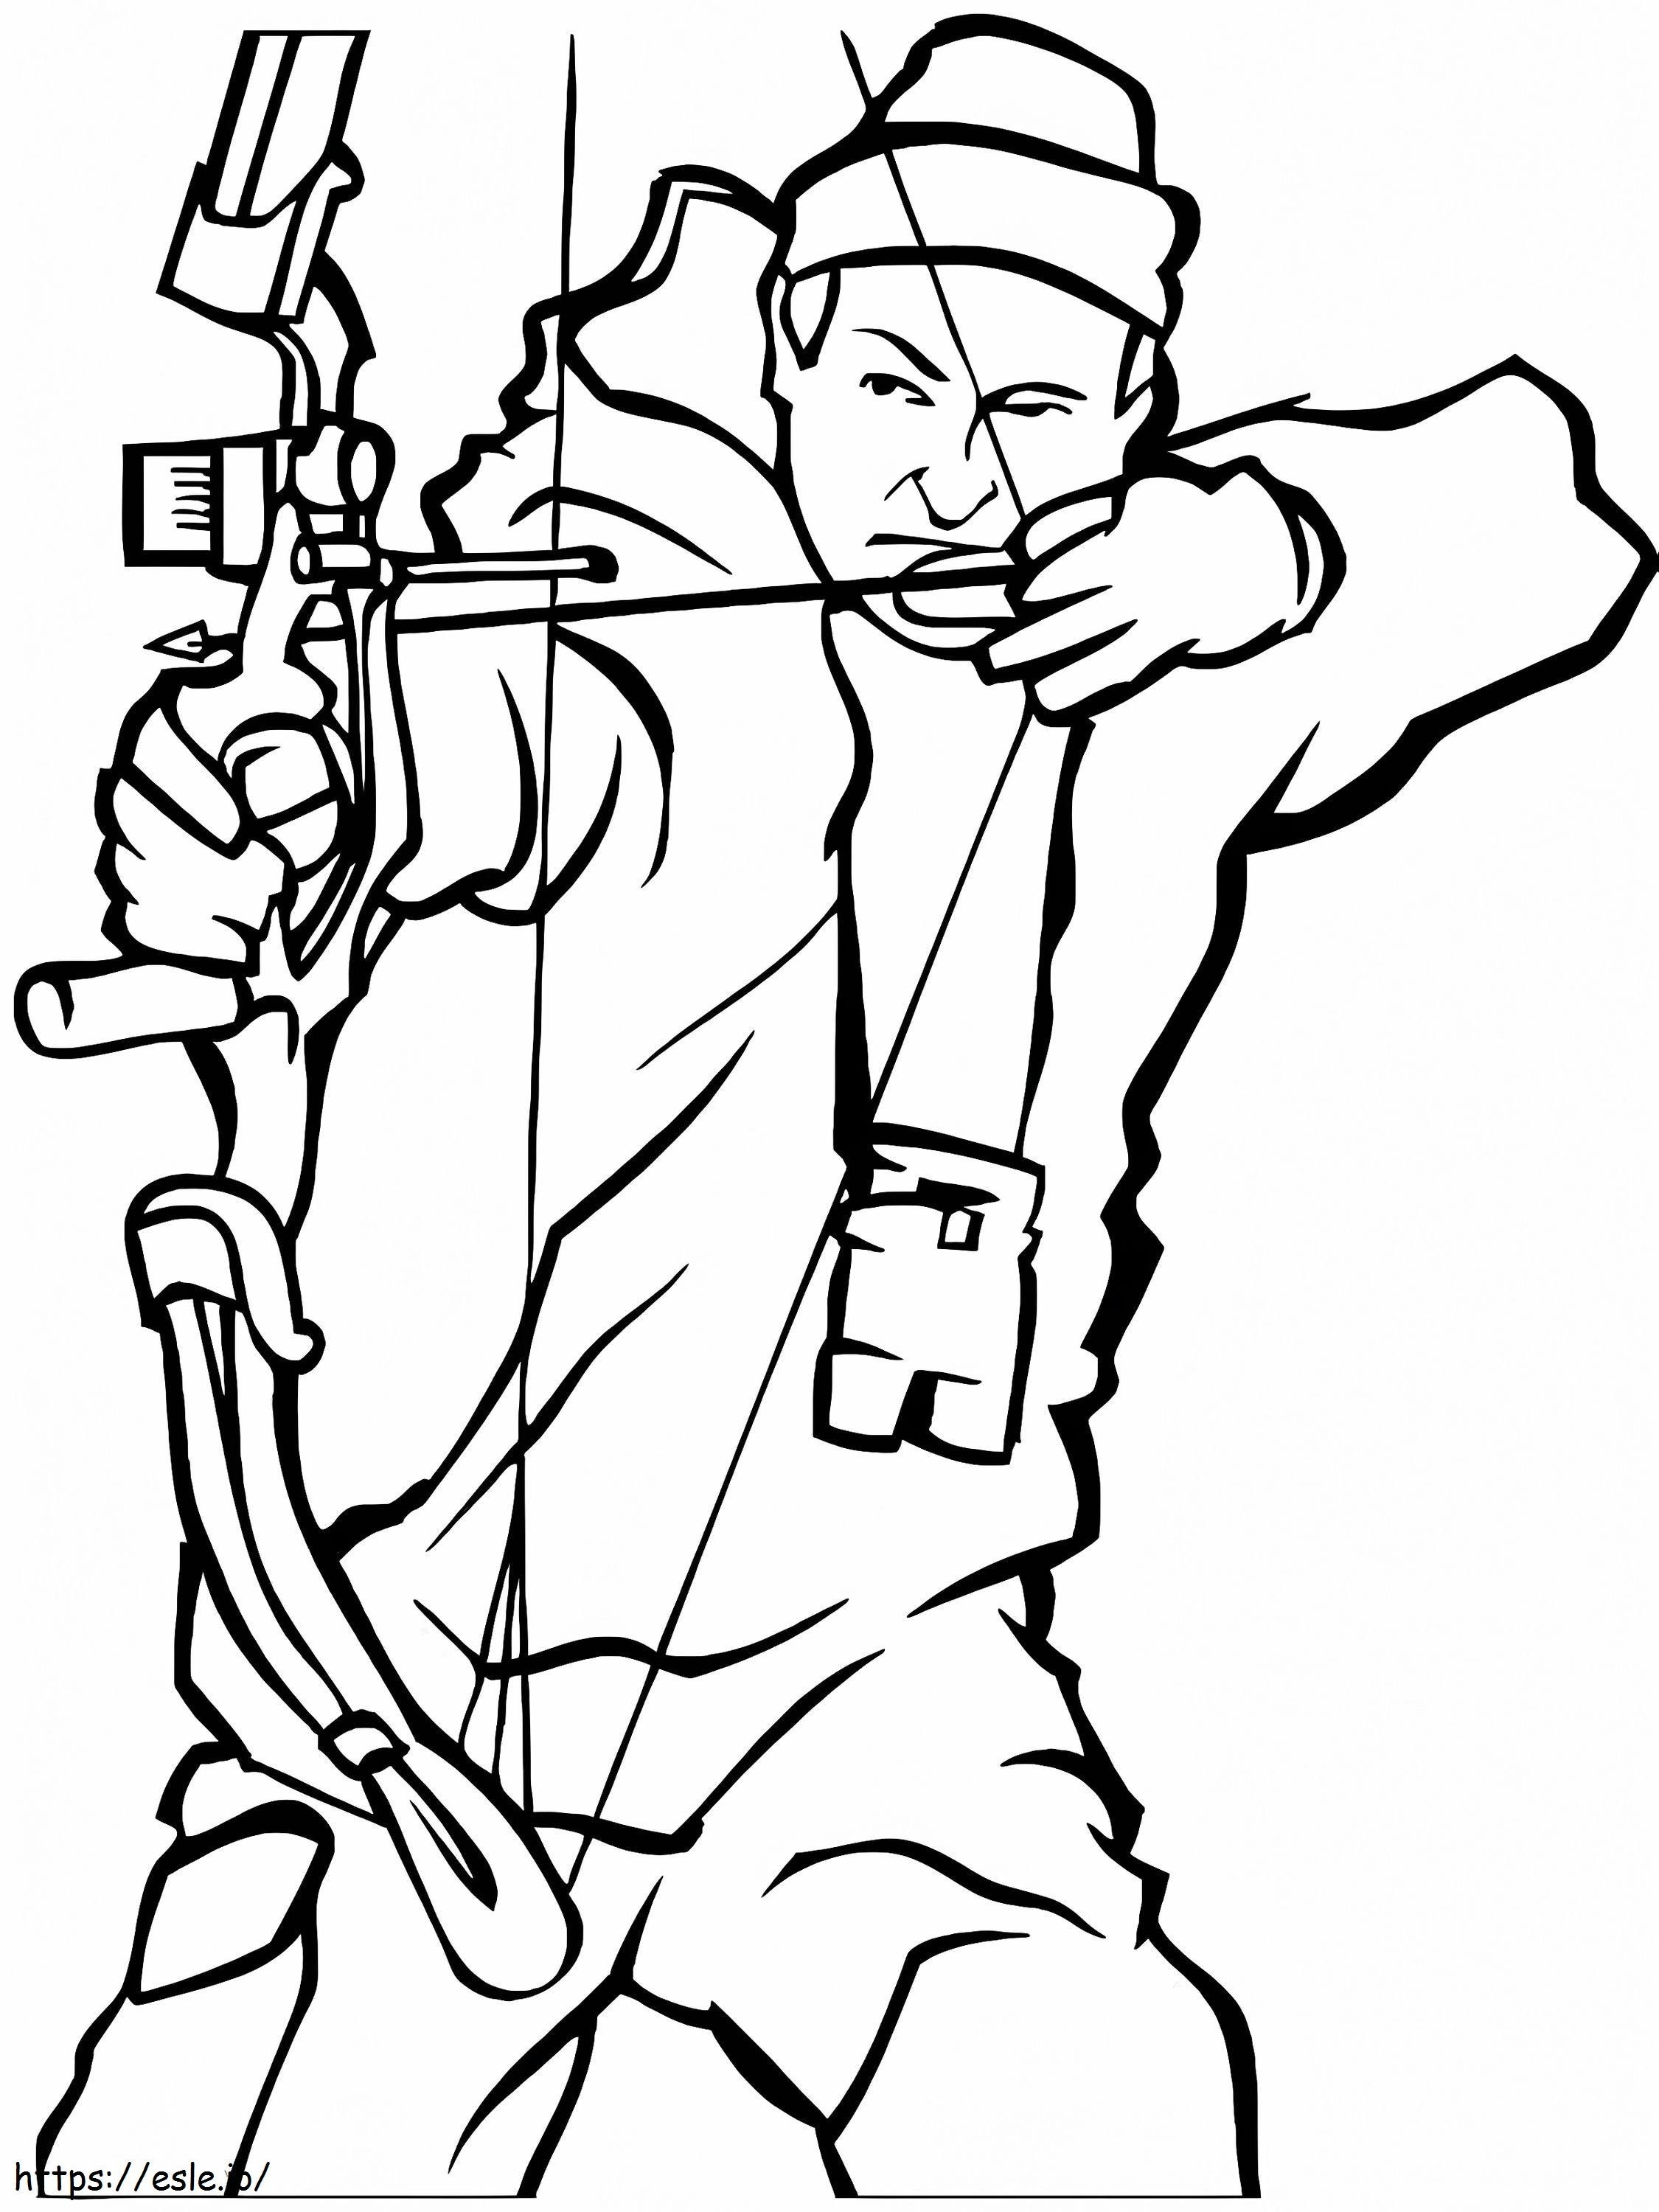 Cool Guy Archery coloring page